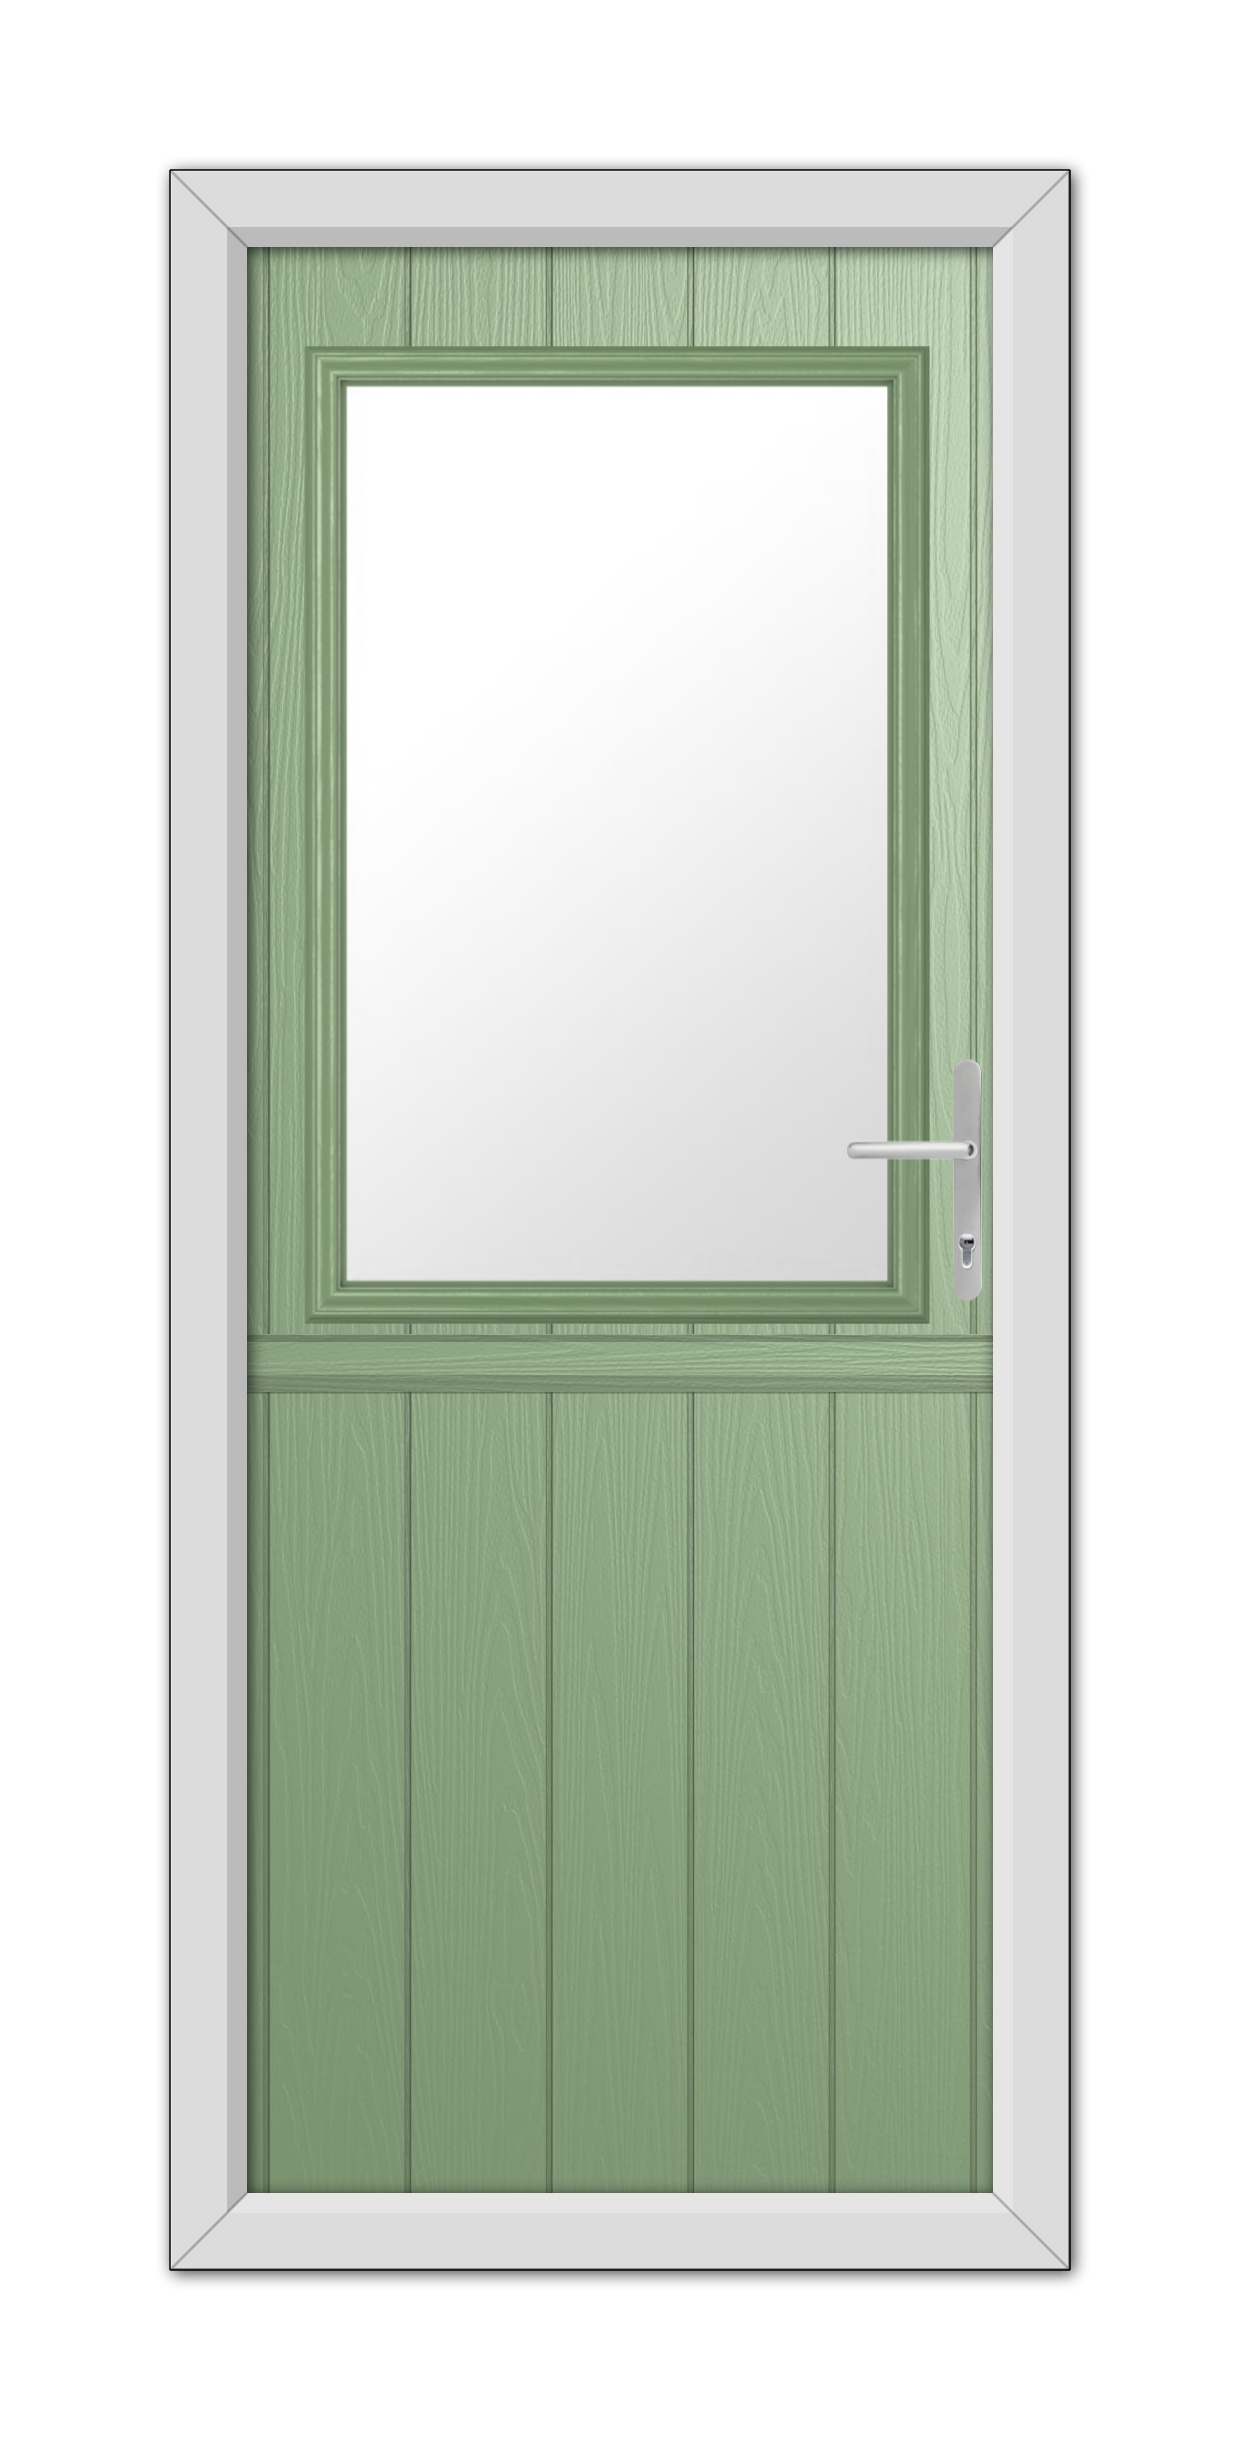 Chartwell Green Clifton Stable Composite Door with a white framed glass window and a metallic handle, set in a gray door frame.